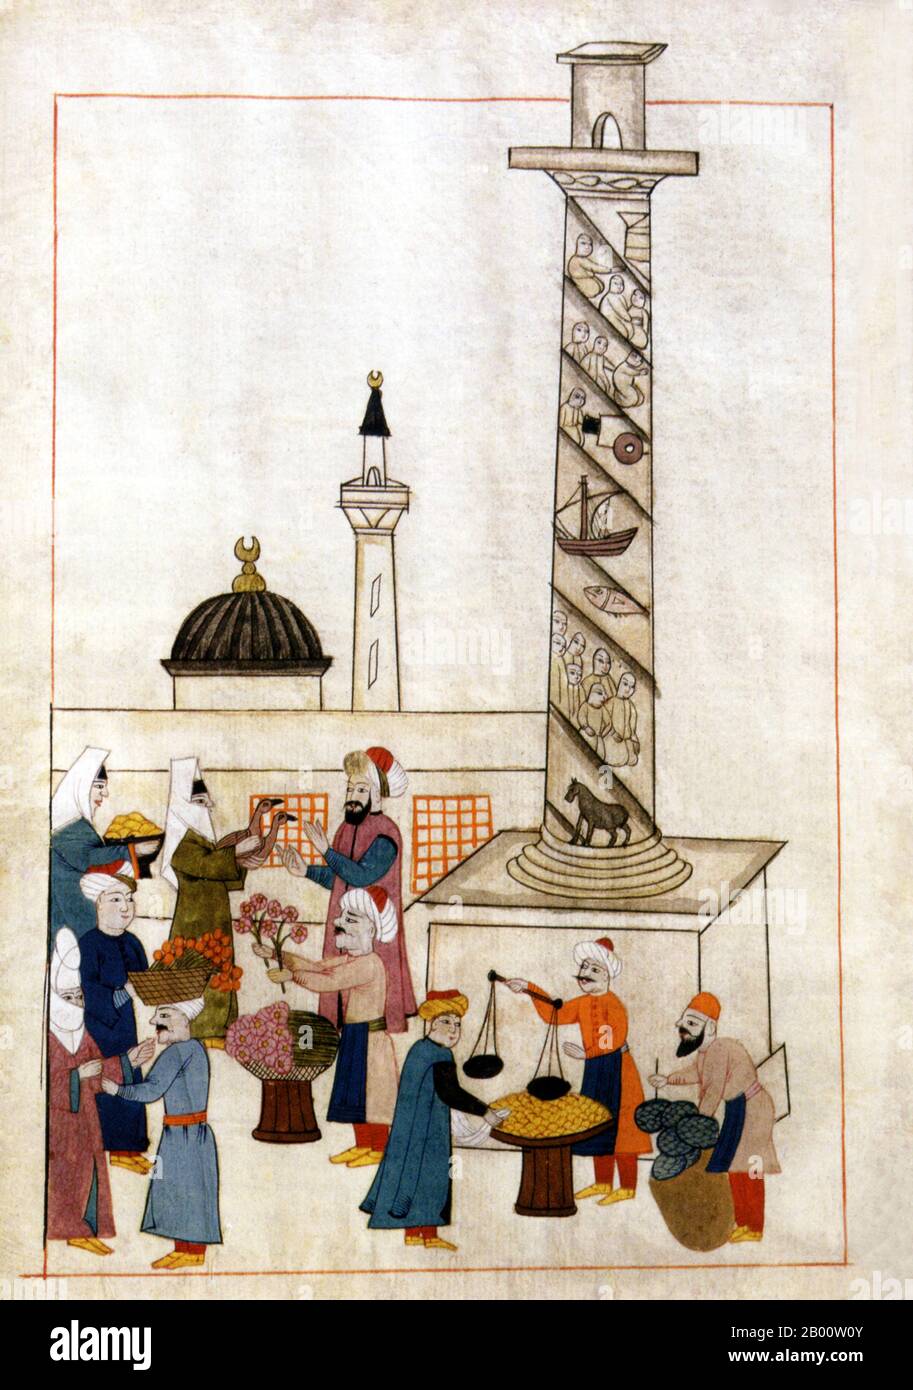 Turkey: An illustration from a 16th-century Ottoman manuscript depicting a scene from the market in Jerrapasha in Constantinople.  Jerrapasha was, at the time, a popular Venetian trading centre. The spiral column in this painting was erected by the Eastern Roman emperor Arcadius in AD 405. Stock Photo